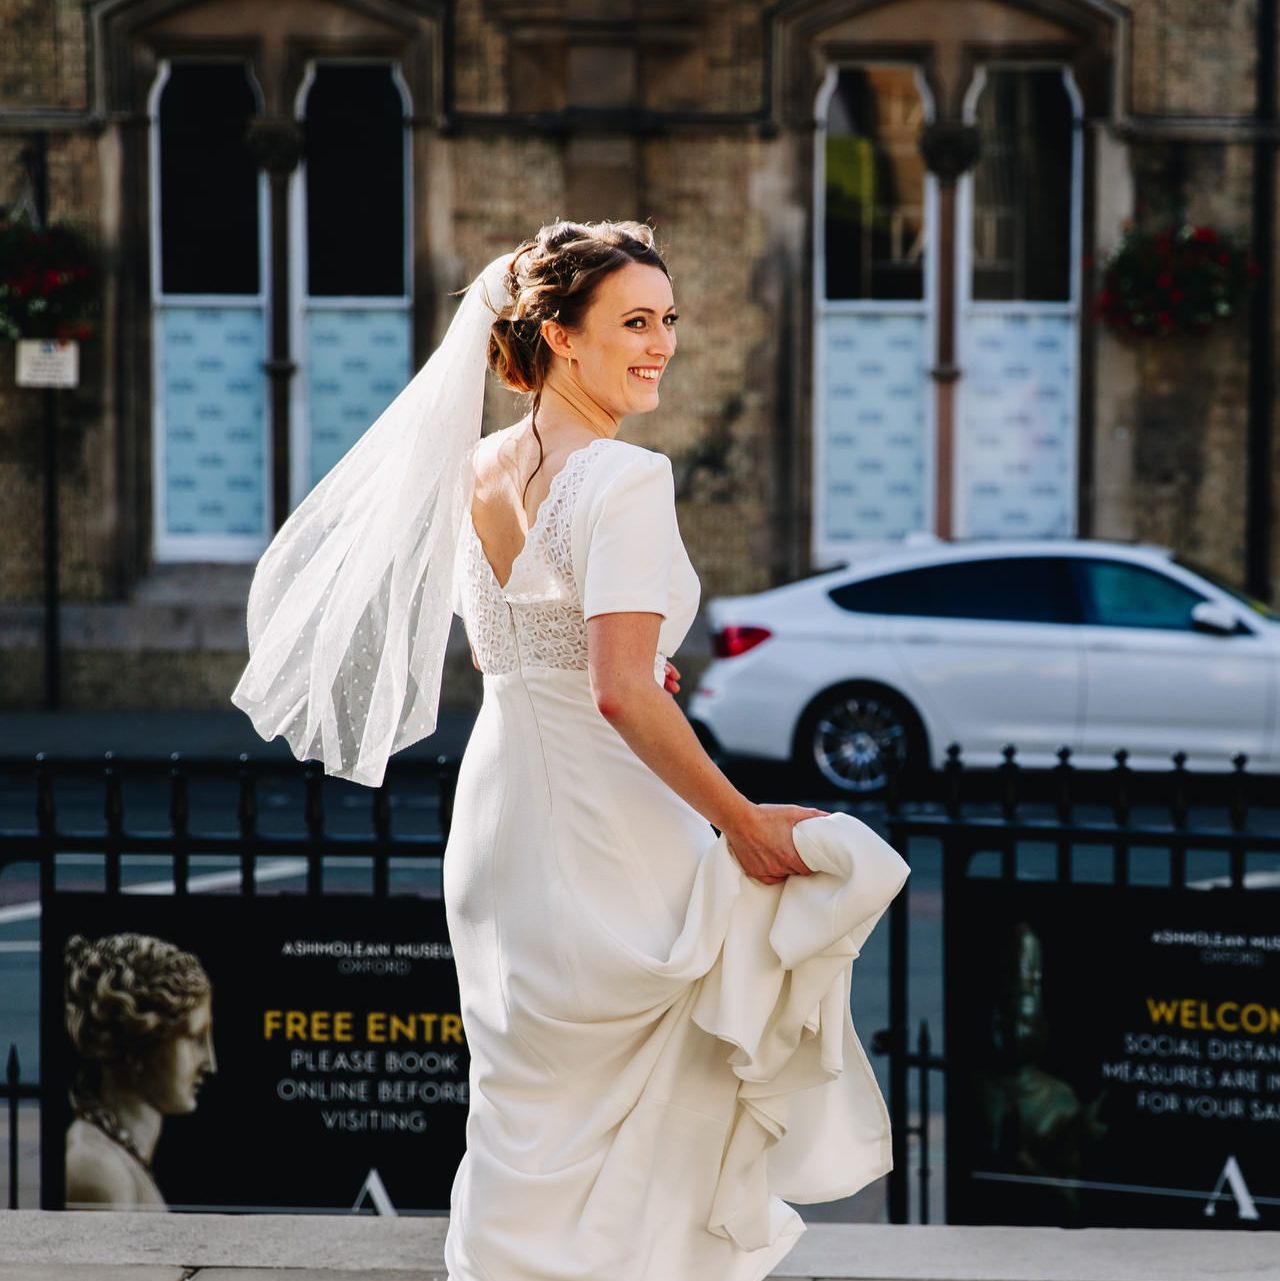 Beautiful bride_Lucy Judson Photography, Oxford wedding photographer